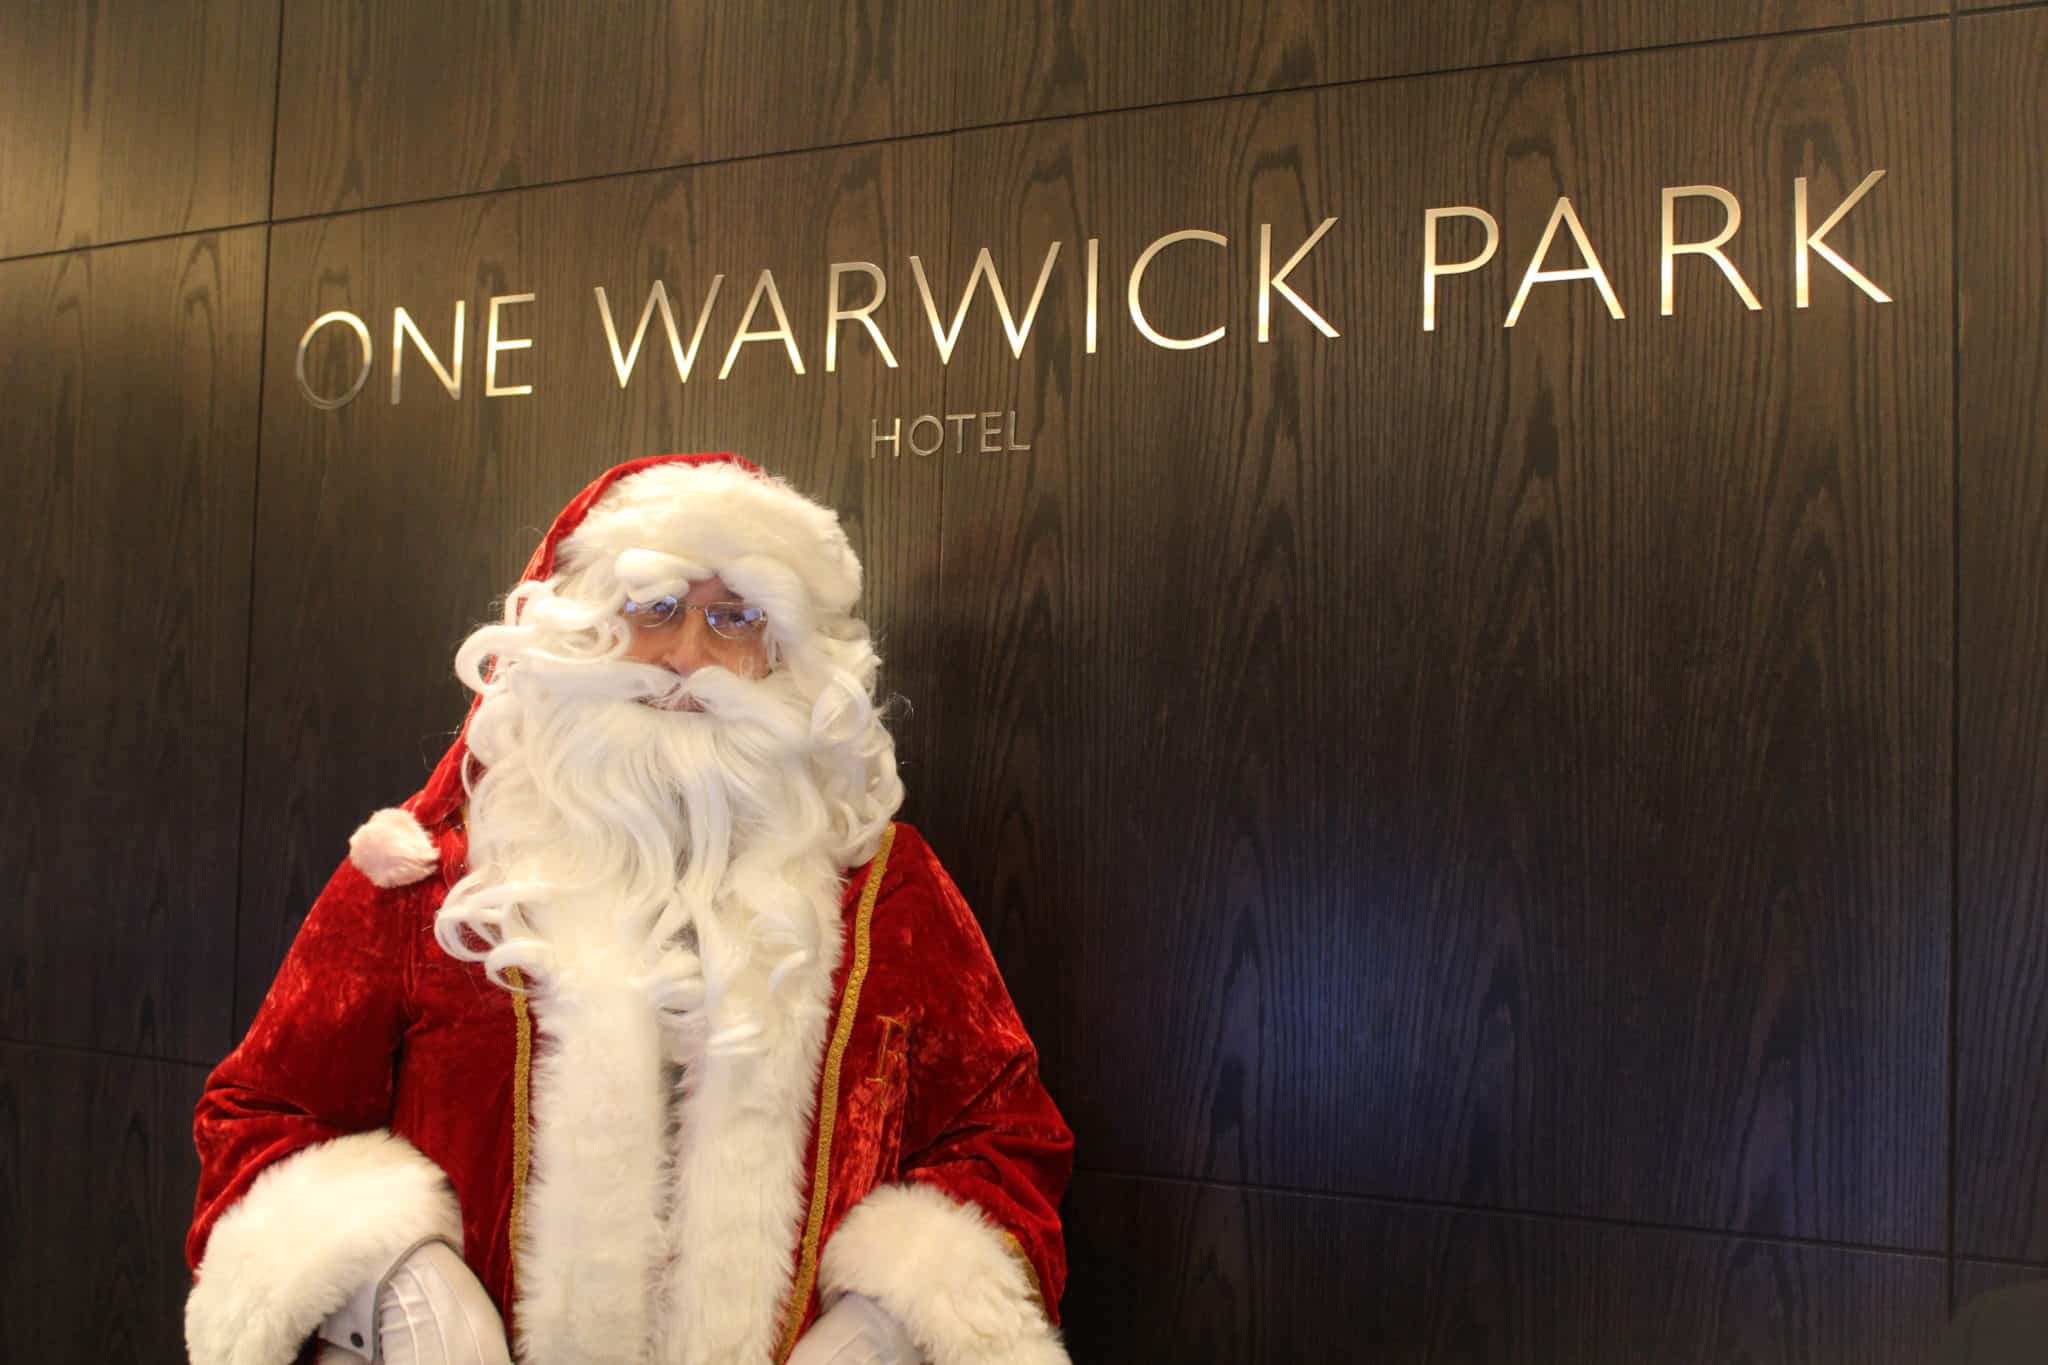 Man dressed as Santa Claus standing in front of a wall with One Warwick Park Hotel written on it